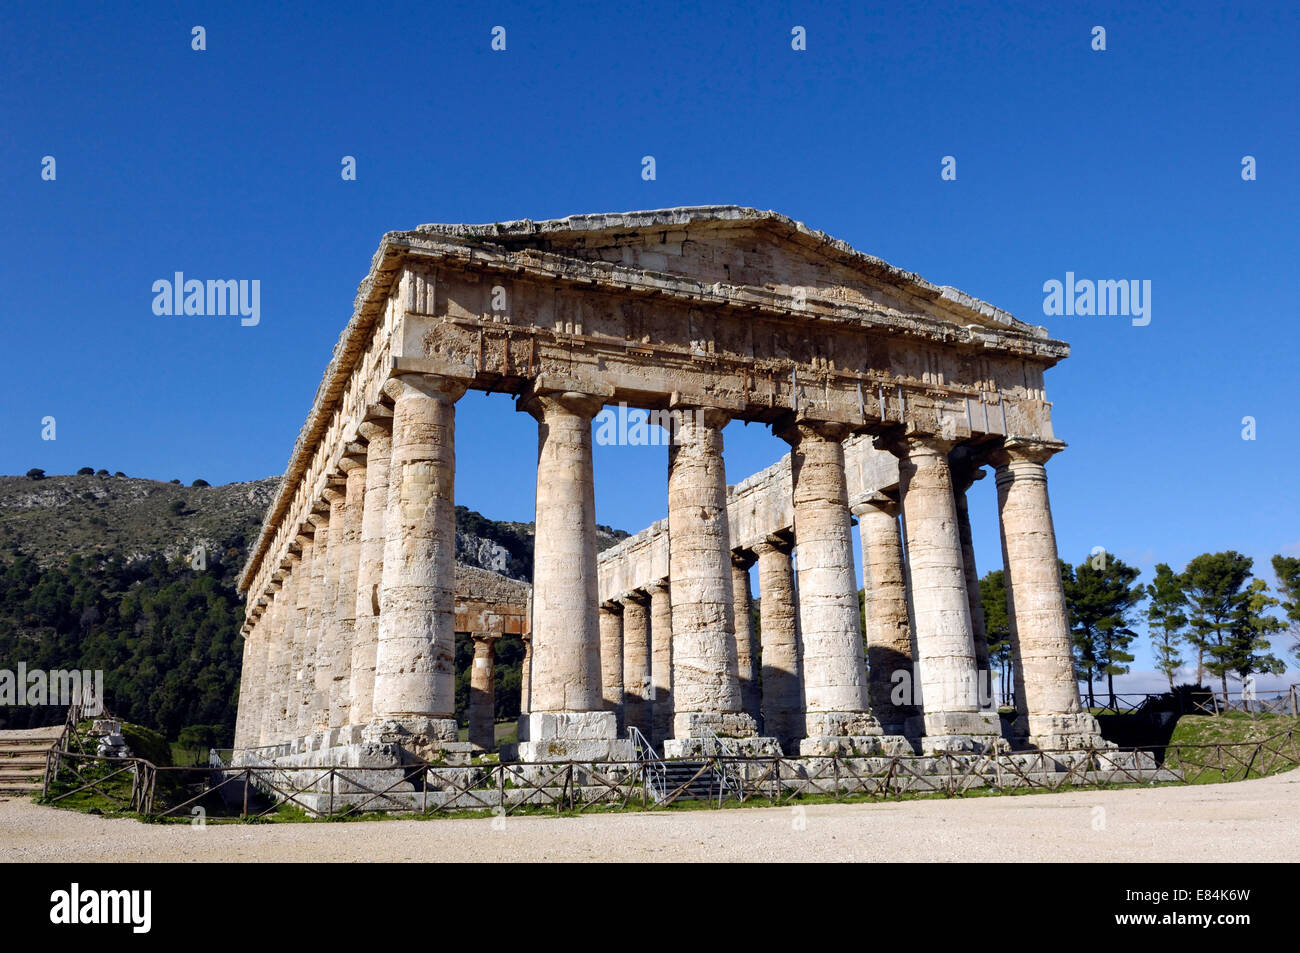 The ancient Doric Greek Hellenic temple ruins at Segesta founded by Aeneas Elymian. Dates from 426 BC Stock Photo